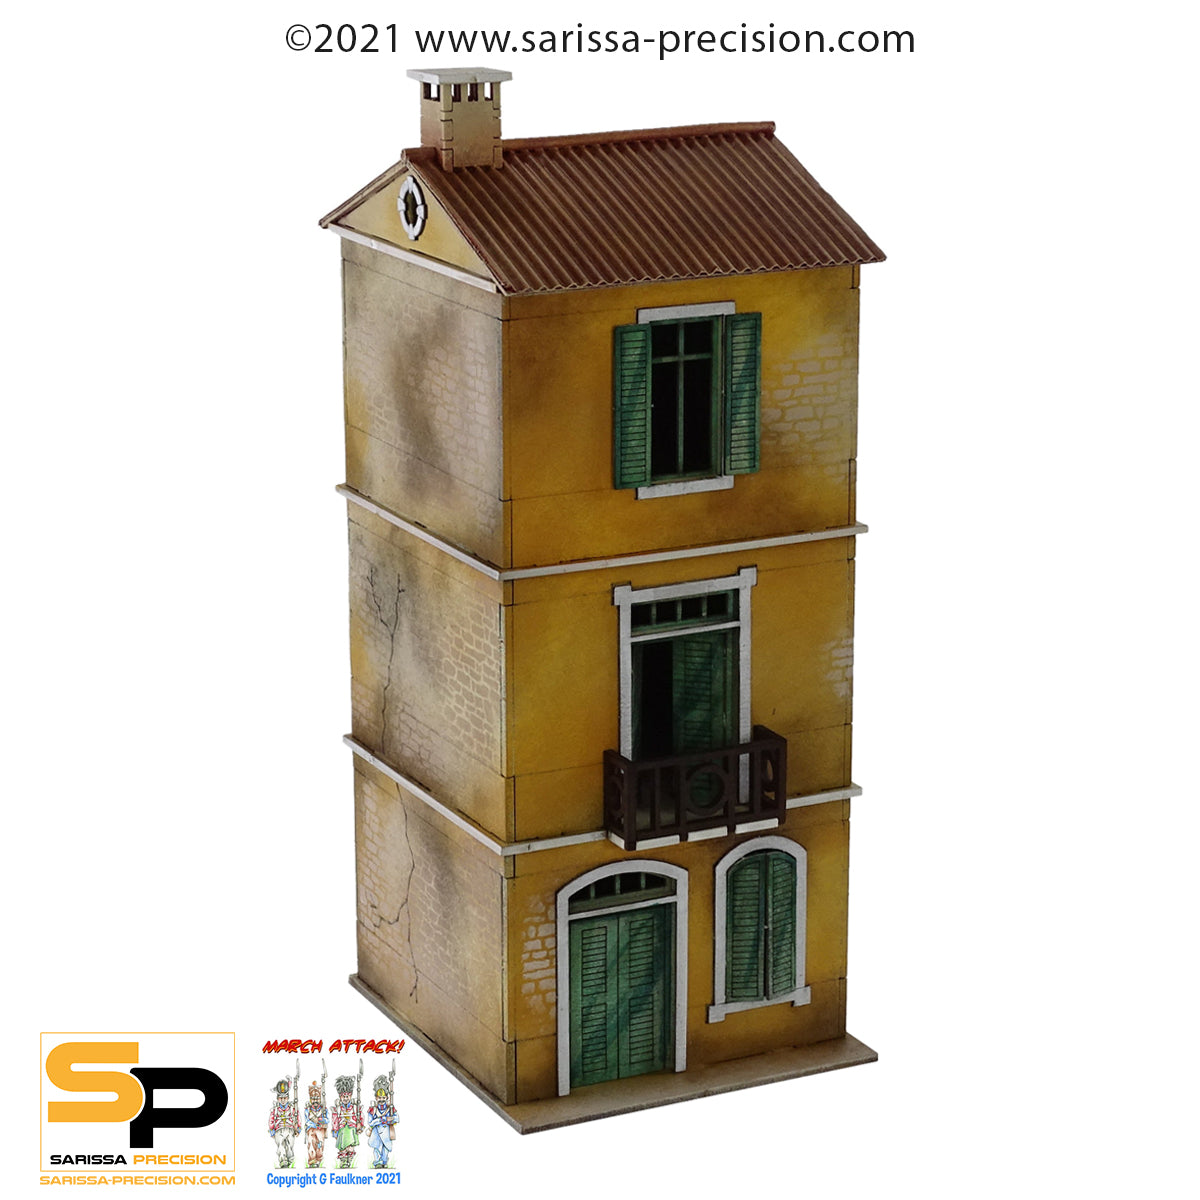 Mediterranean Small House - 3 Floors with Balcony and Pitched Roof